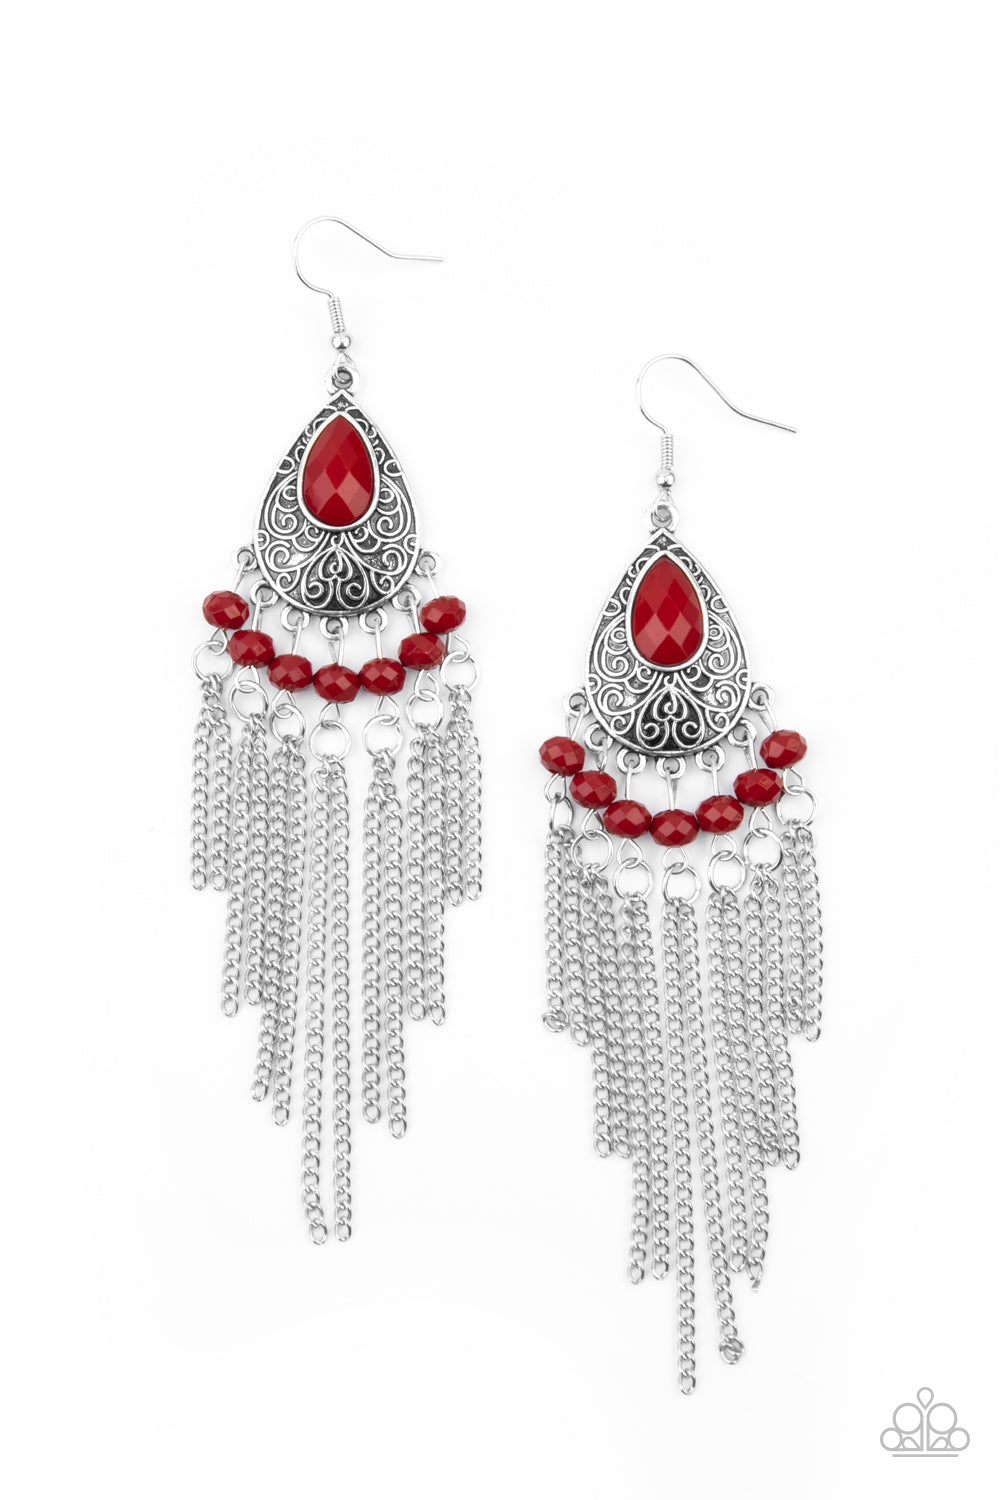 Paparazzi Accessories Floating on HEIR - Red Earrings - Lady T Accessories